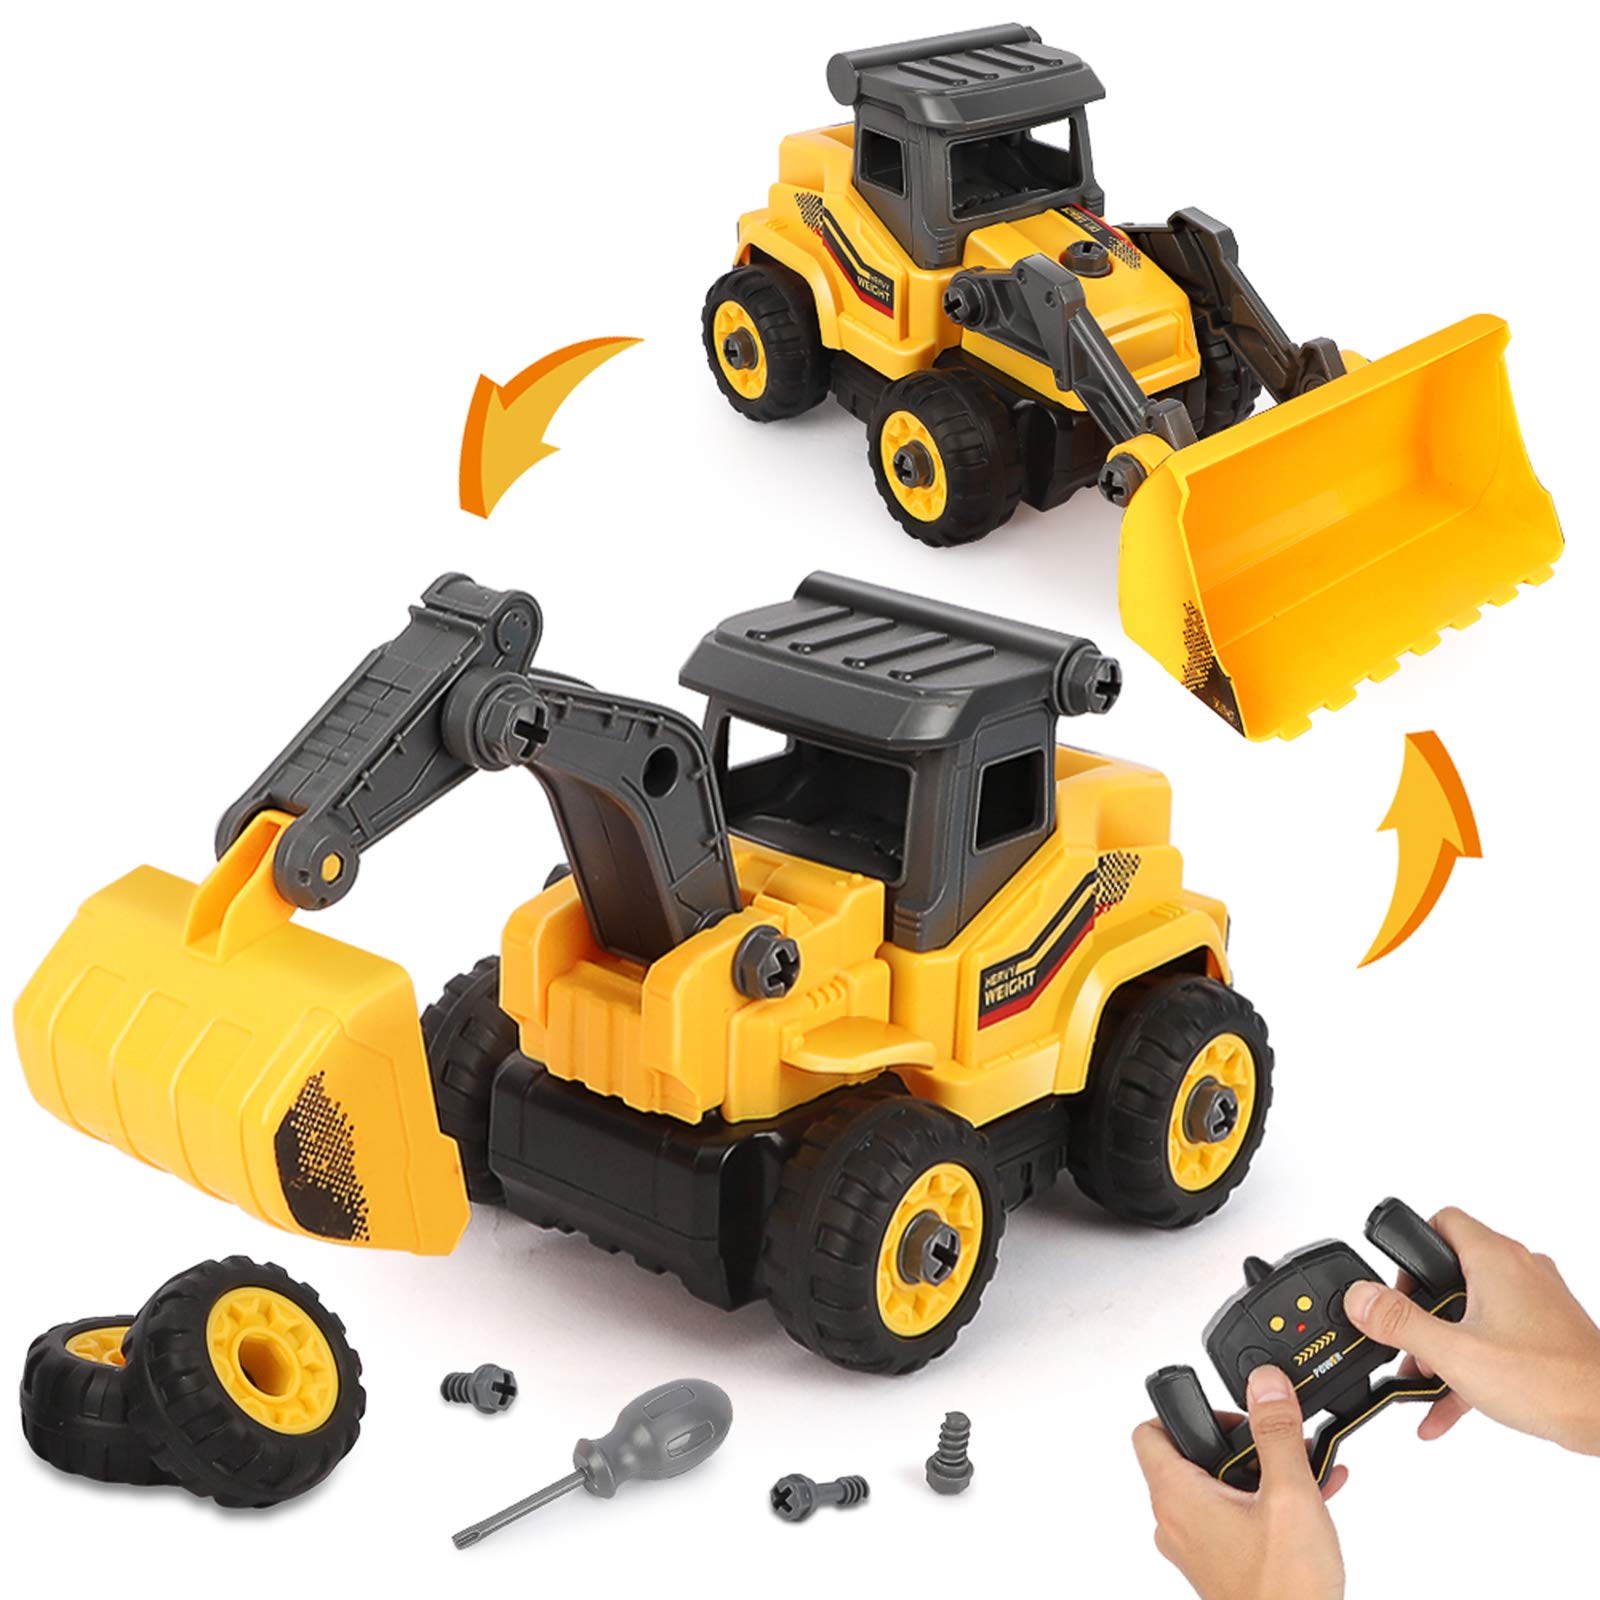 Low MOQ for Wooden Balance Toy - BeebeeRun Take Apart Construction Toys – Construction Trucks for Boys – 2 in 1 RC Construction Vehicles – Remote Control Excavator and Bulldozer ...